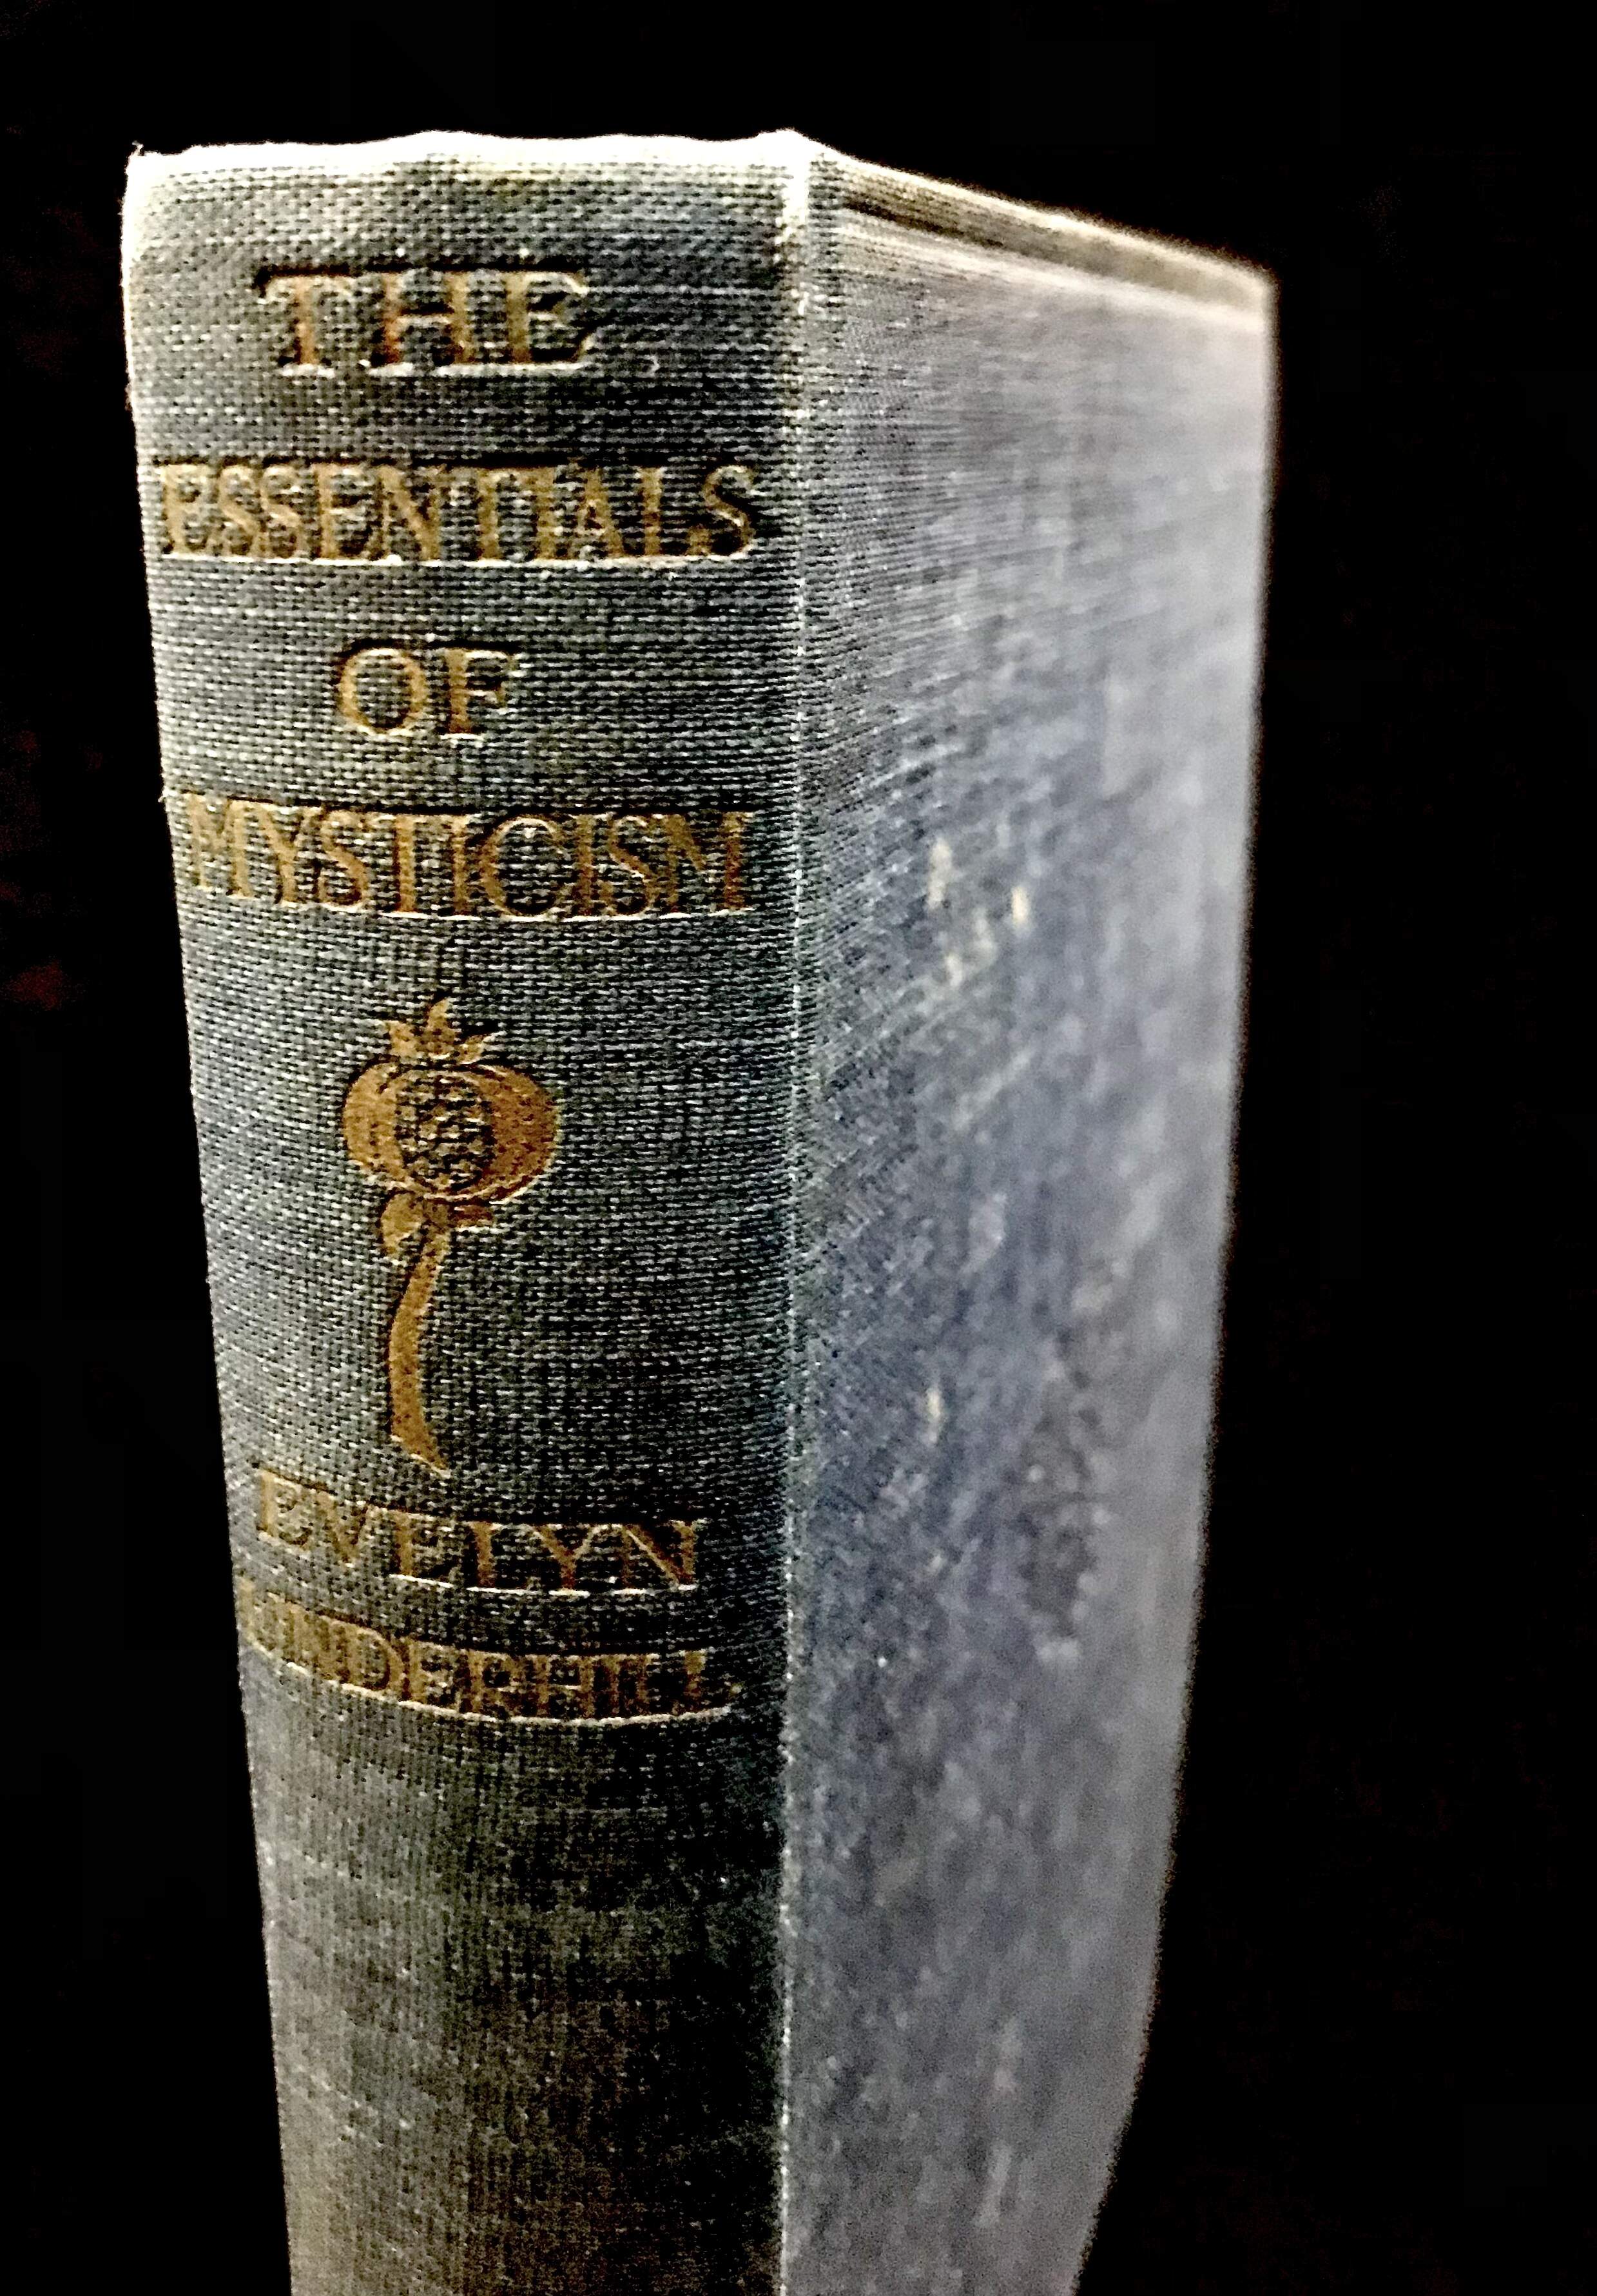 The Essentials of Mysticism by Evelyn Underhill